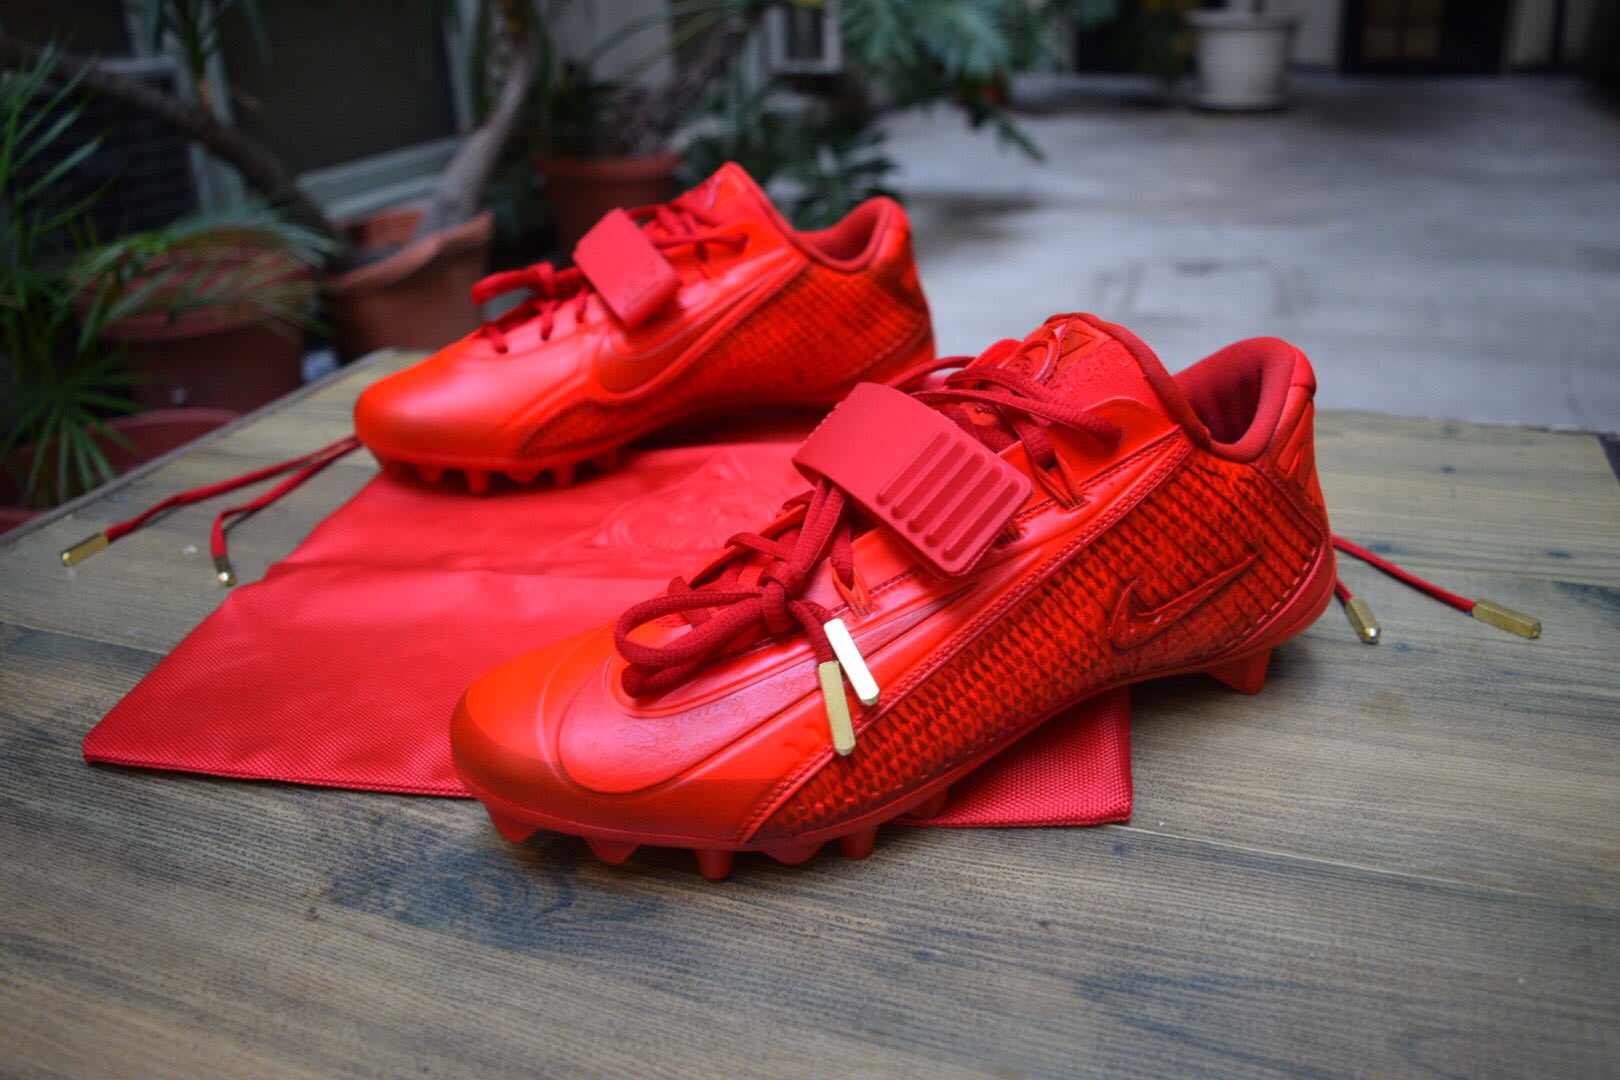 Red October Yeezy Cleats Odell Beckham by Kickasso